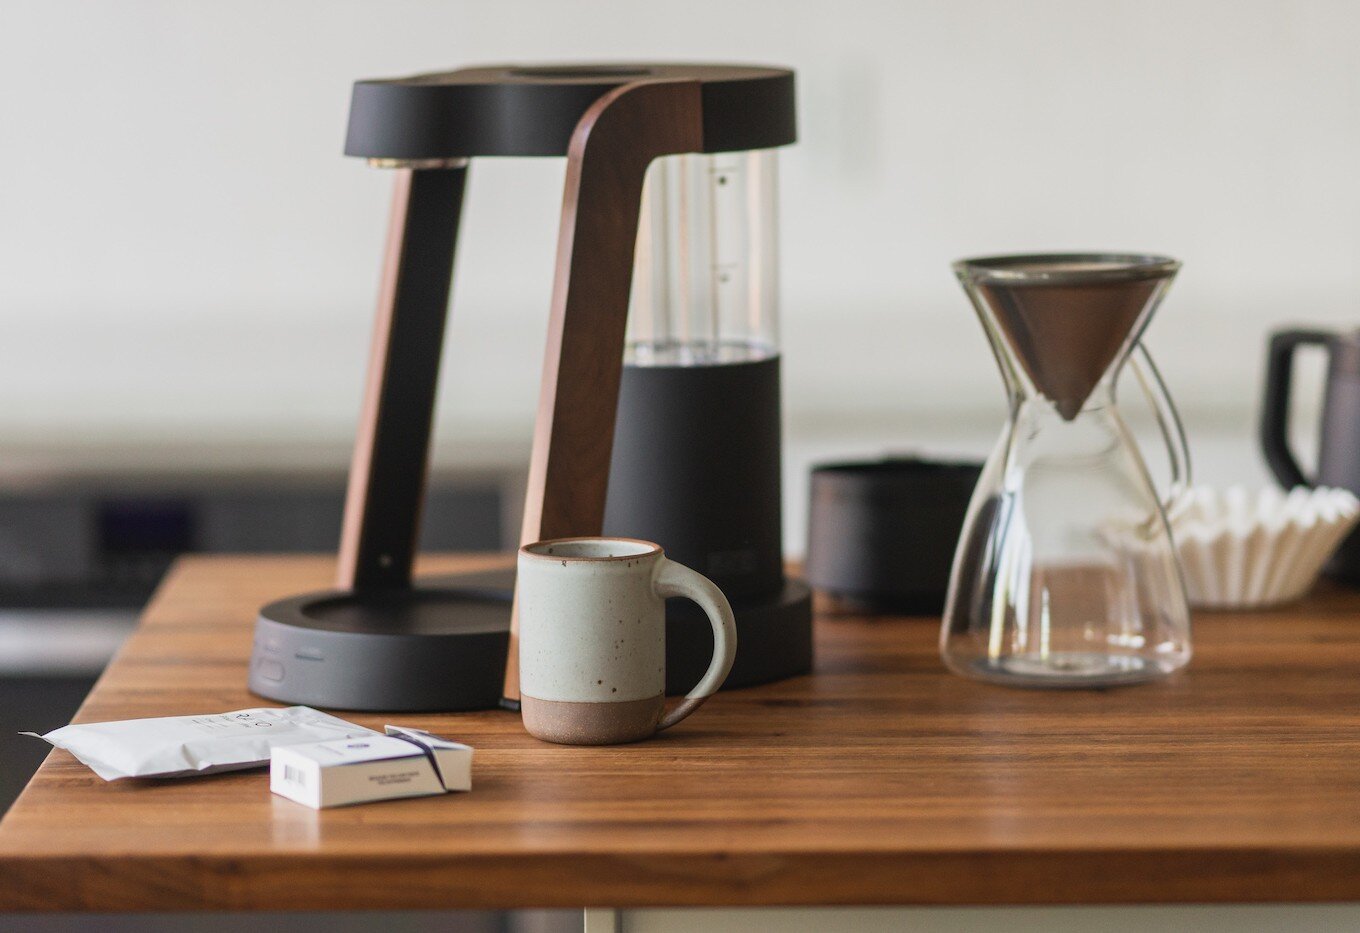 With the right coffee set up, you can start the New Year off right!
.
.
.
#ablebrewing #ablekone #coffee #coffeefilter #butfirstcoffee #coffeecommunity #morethanacup #coffeebreak #homebarista